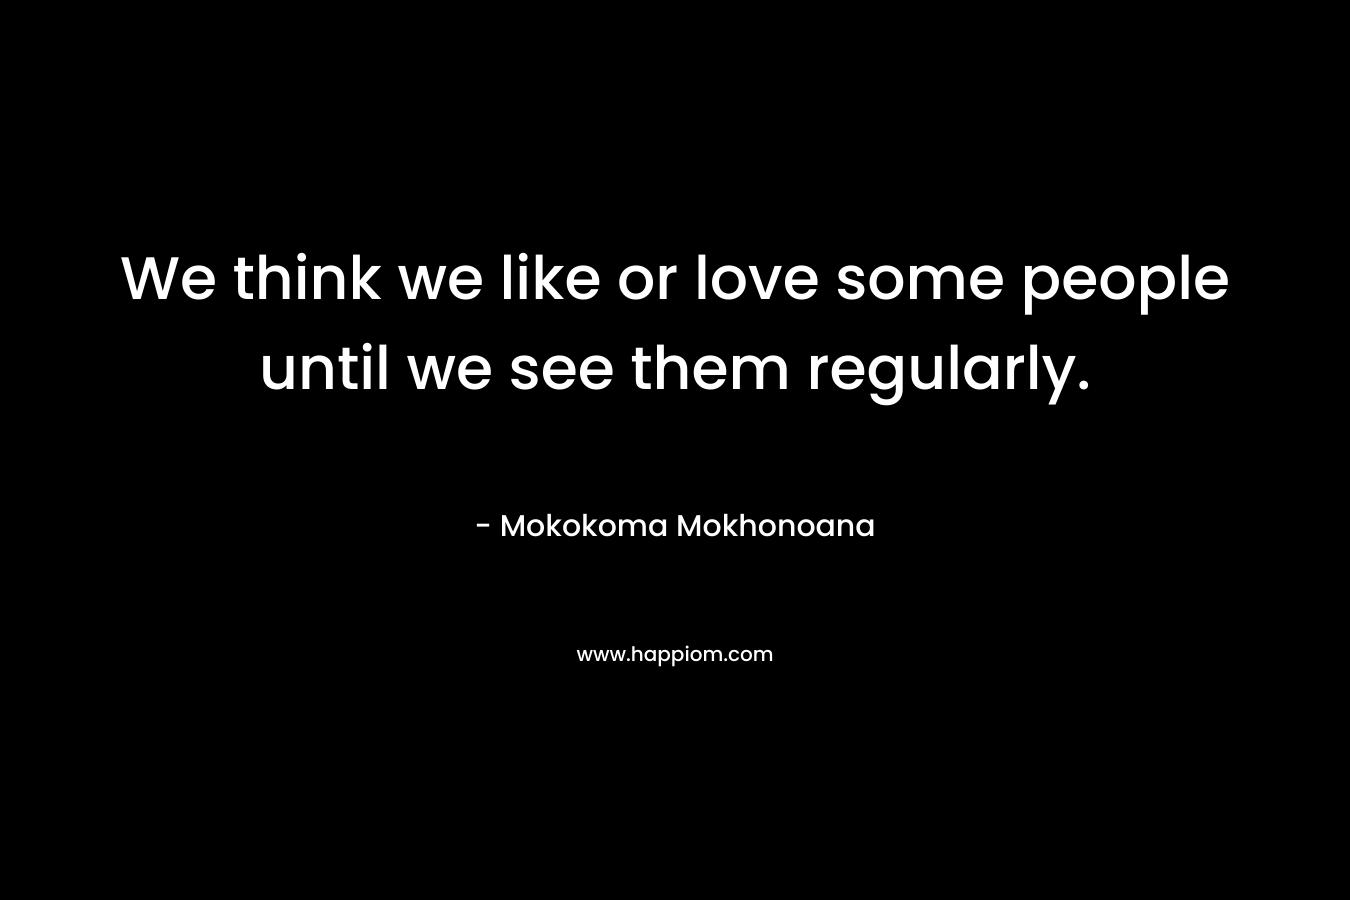 We think we like or love some people until we see them regularly.